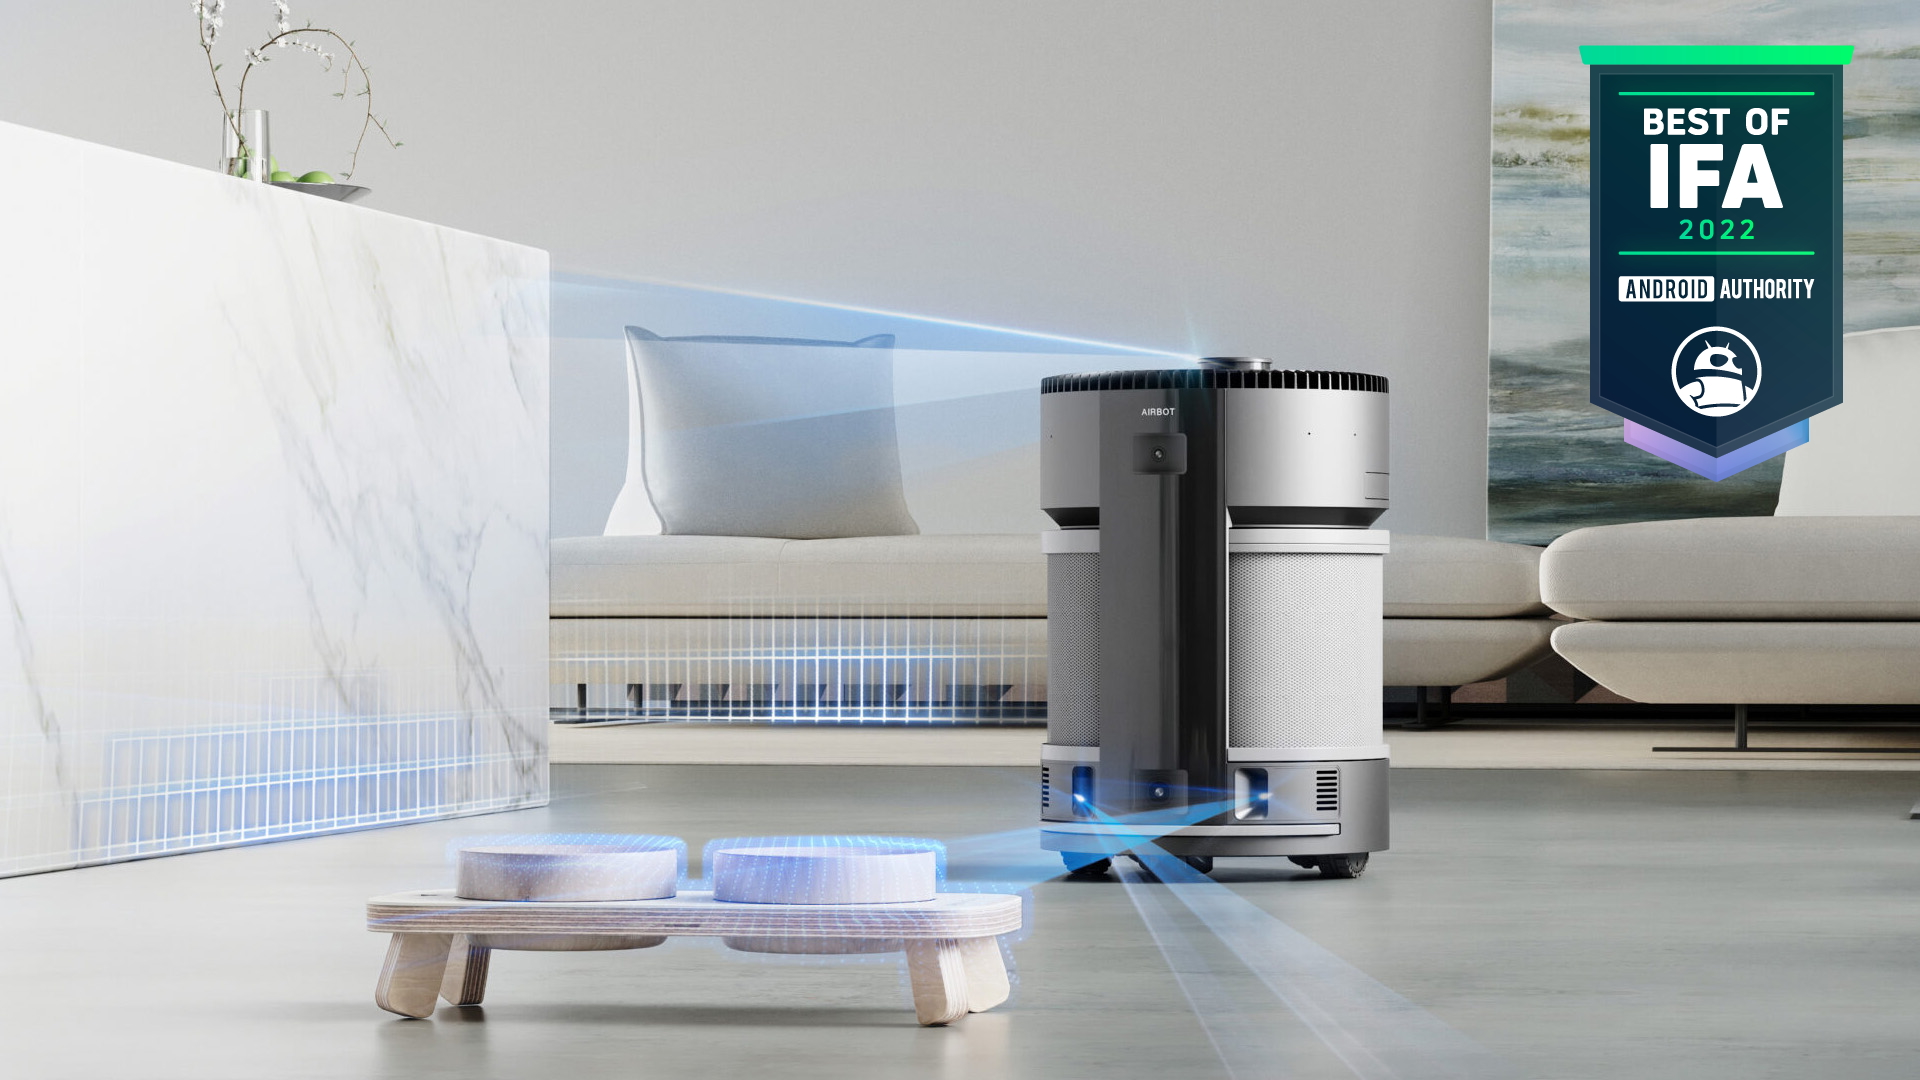 ECOVACS Airbot Z1 Best of IFA 2022 badged